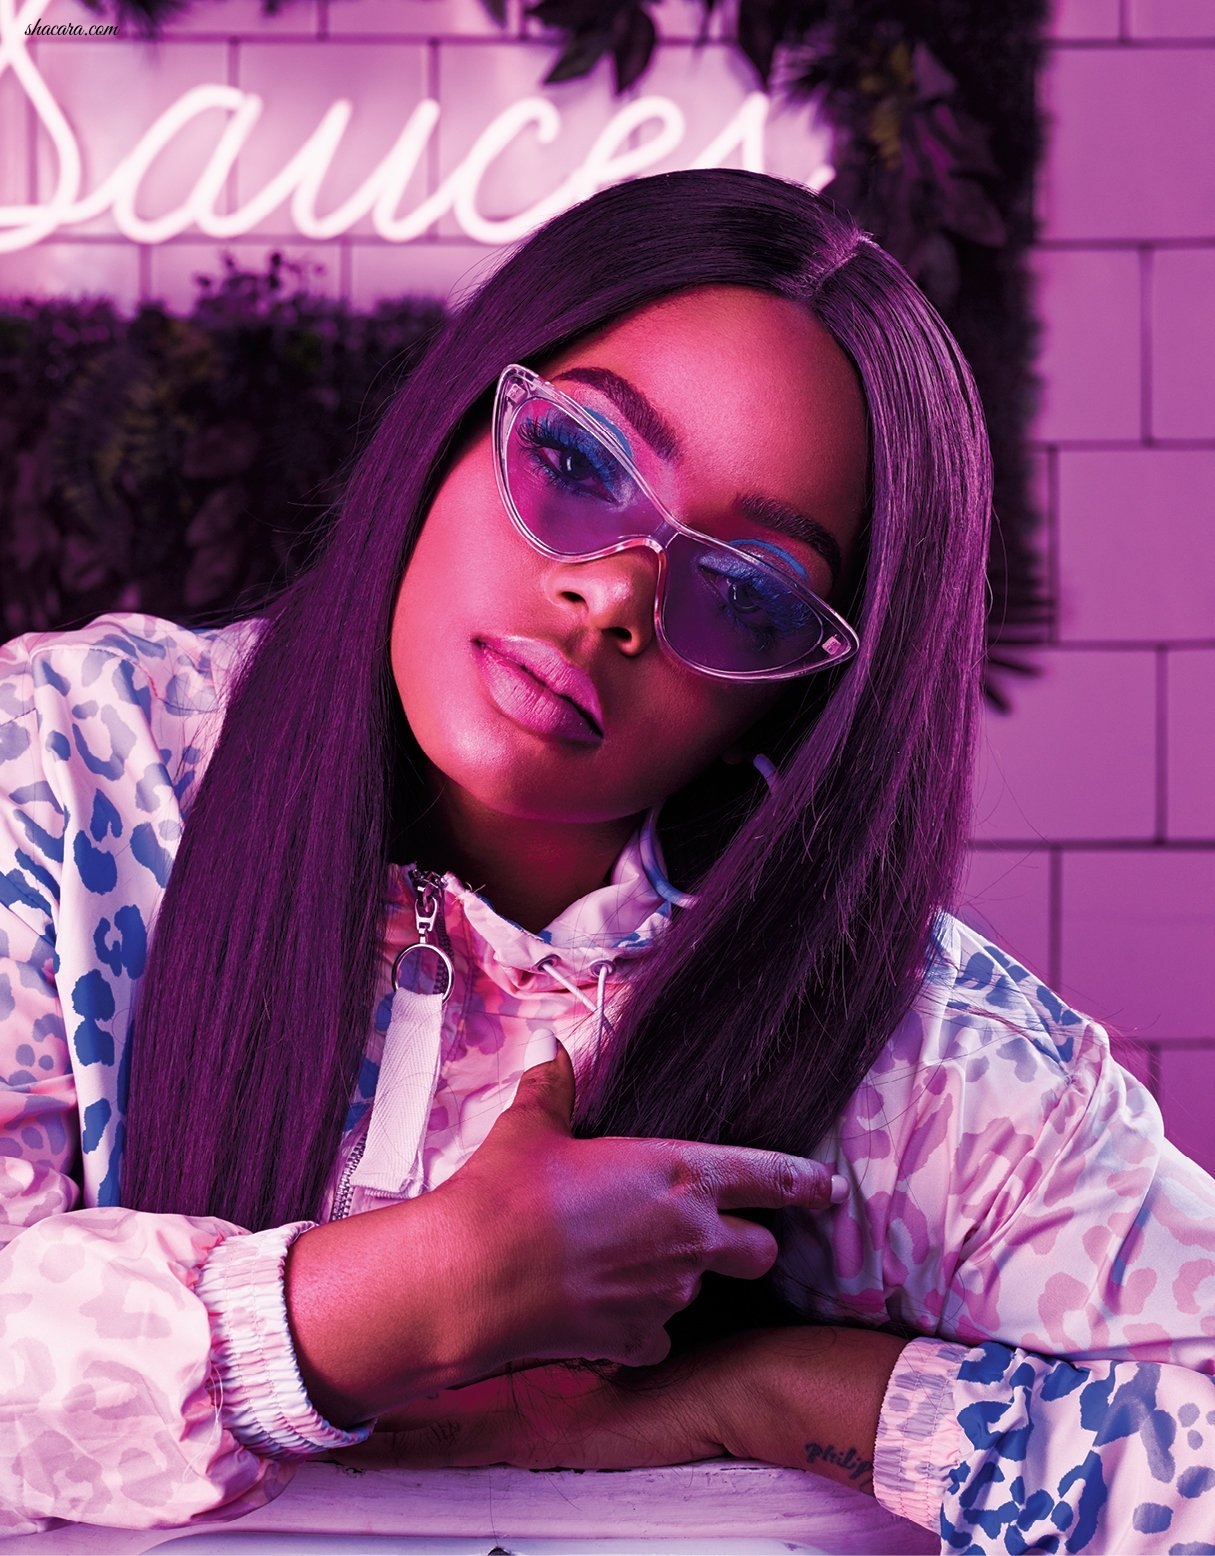 South African Singer Shekhinah Is Cosmopolitan South Africa’s Latest Cover Girl